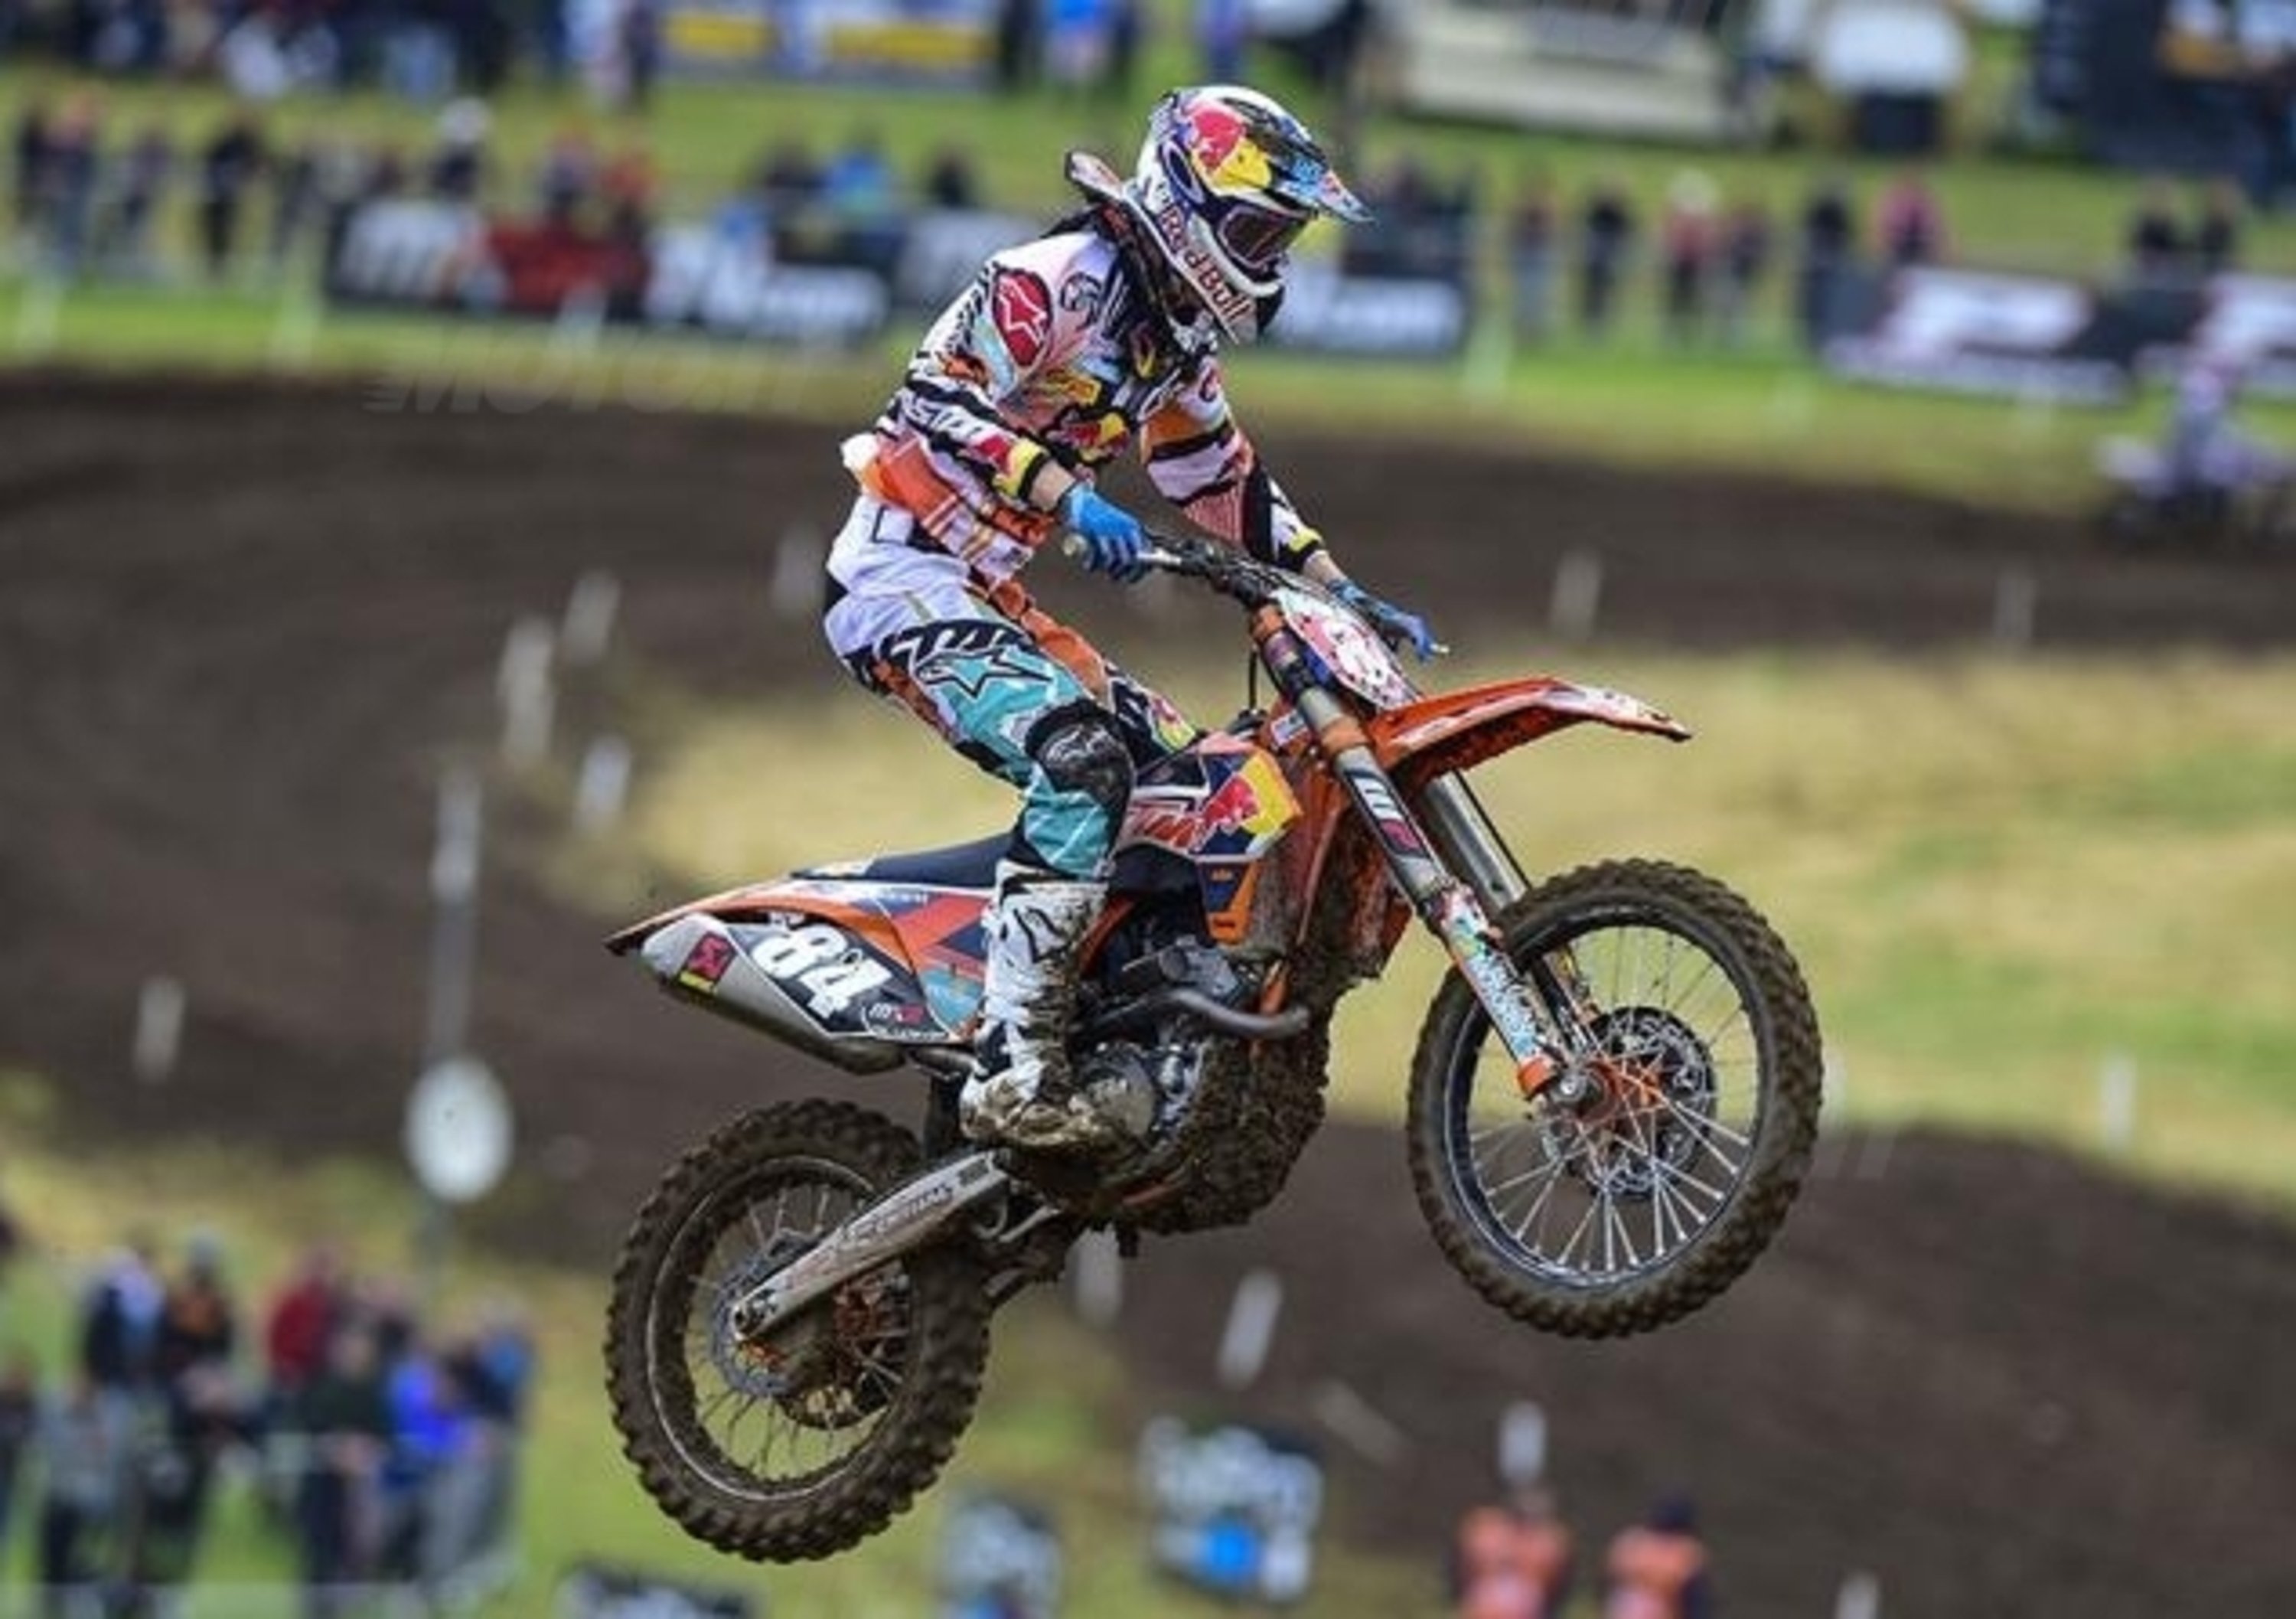 MXGP. Cairoli vince in onore del padre